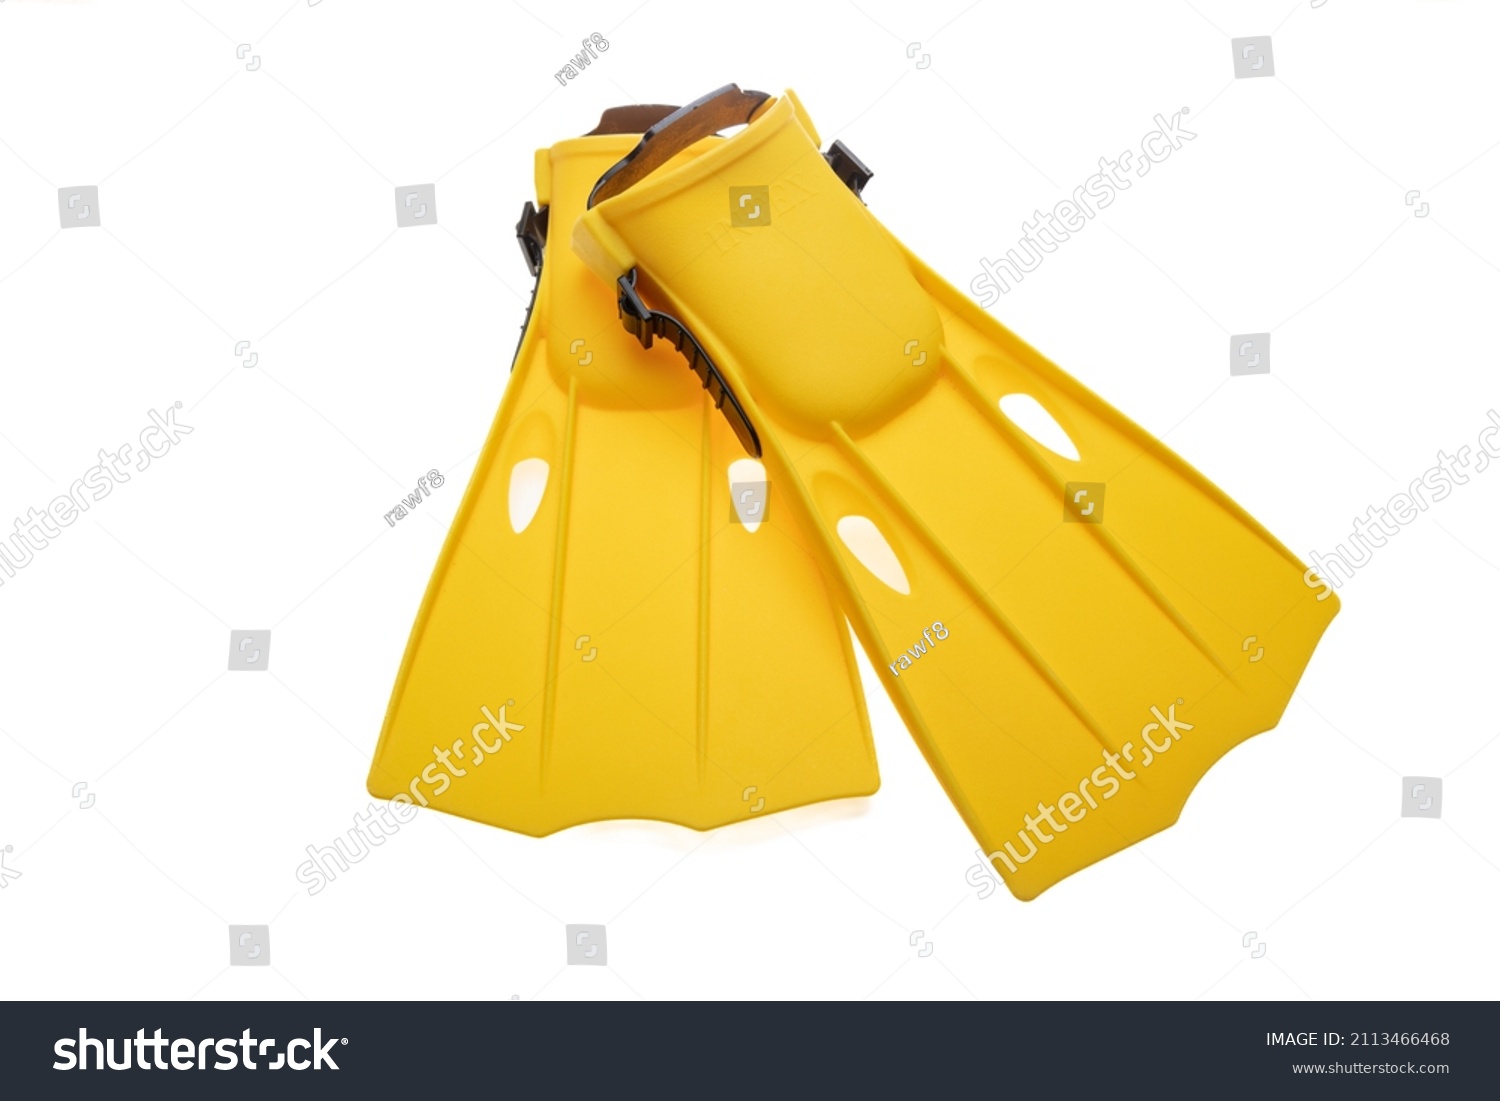 Flippers yellow isolated cutout on white background. Overhead view of pair of fin footwear, swim and dive sea equipment. Sport, activity, leisure. #2113466468